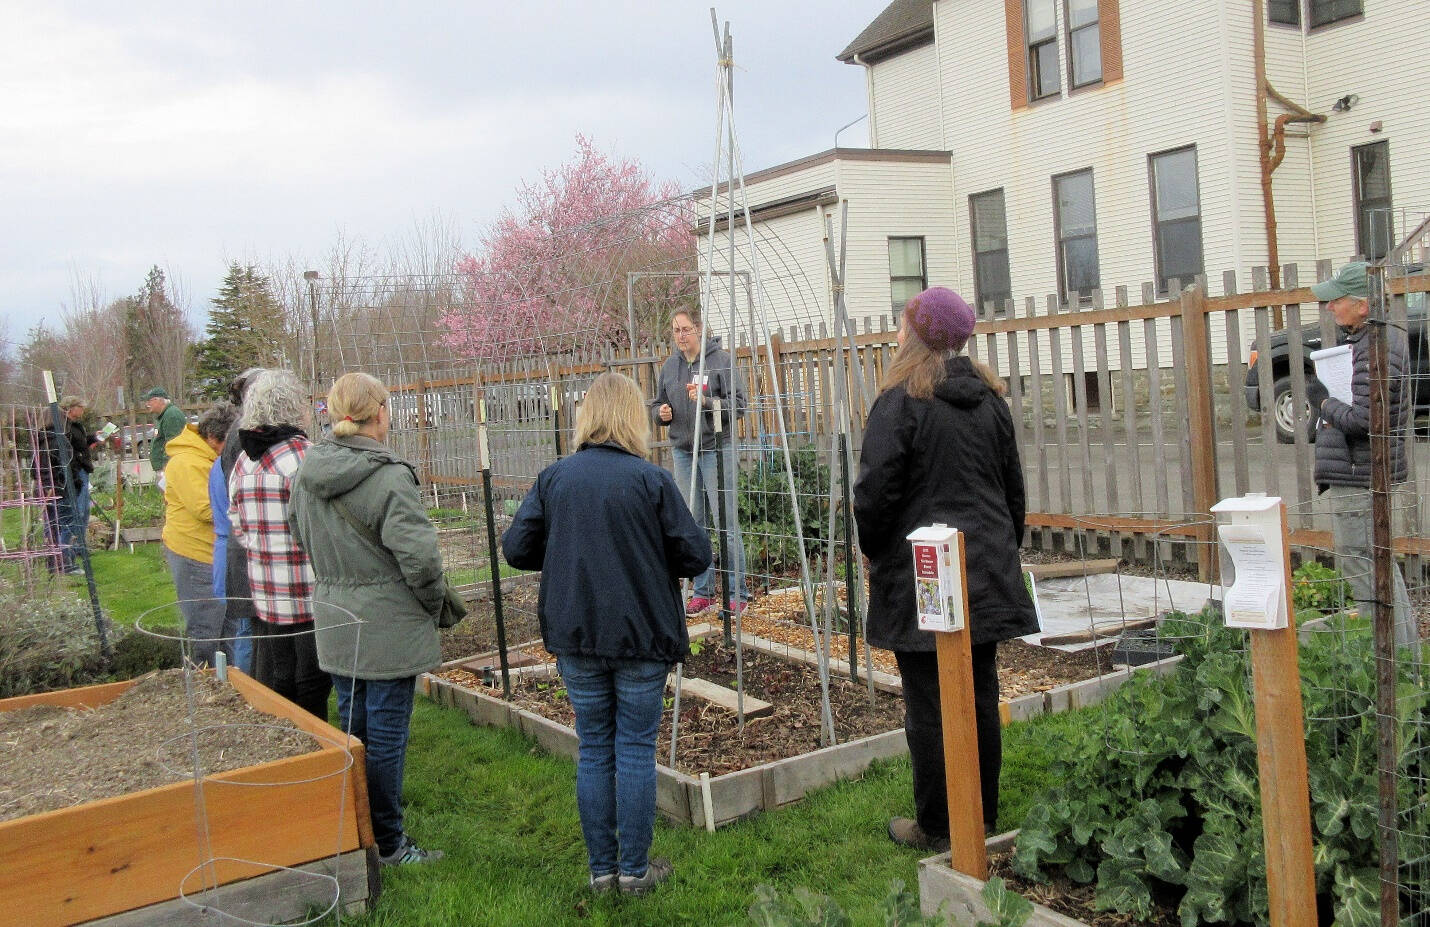 Clallam County Master Gardener Laurel Moulton in April addresses the reasons for organizing garden beds to enable crop rotation practices as shown here in Master Gardener north plots at the Fifth Street Community Garden in Port Angeles. (Photo by Audreen Williams)